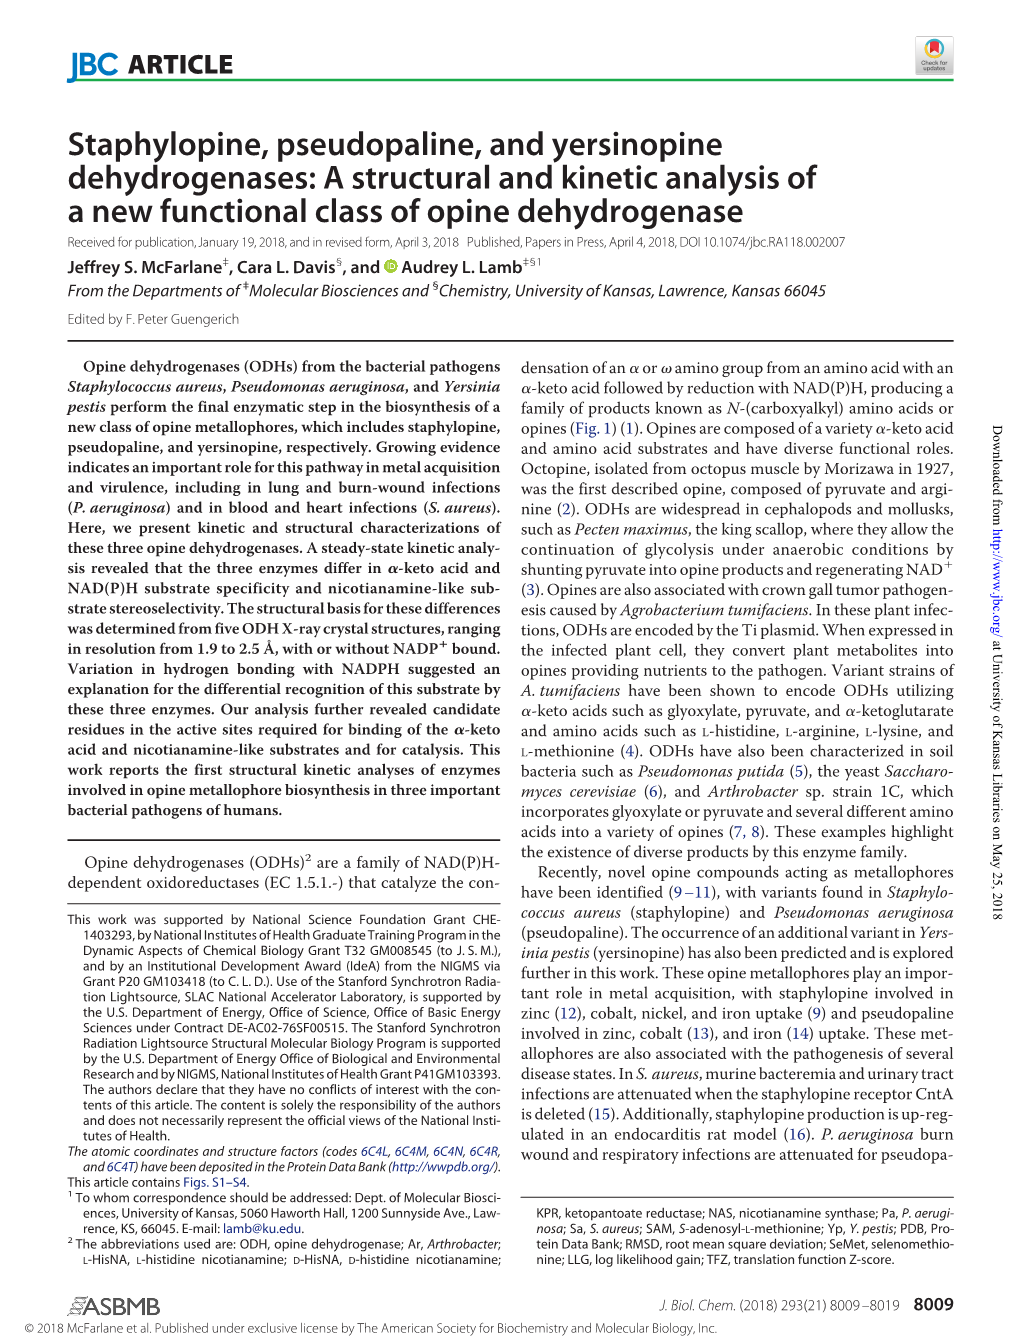 A Structural and Kinetic Analysis of a New Functional Class of Opine